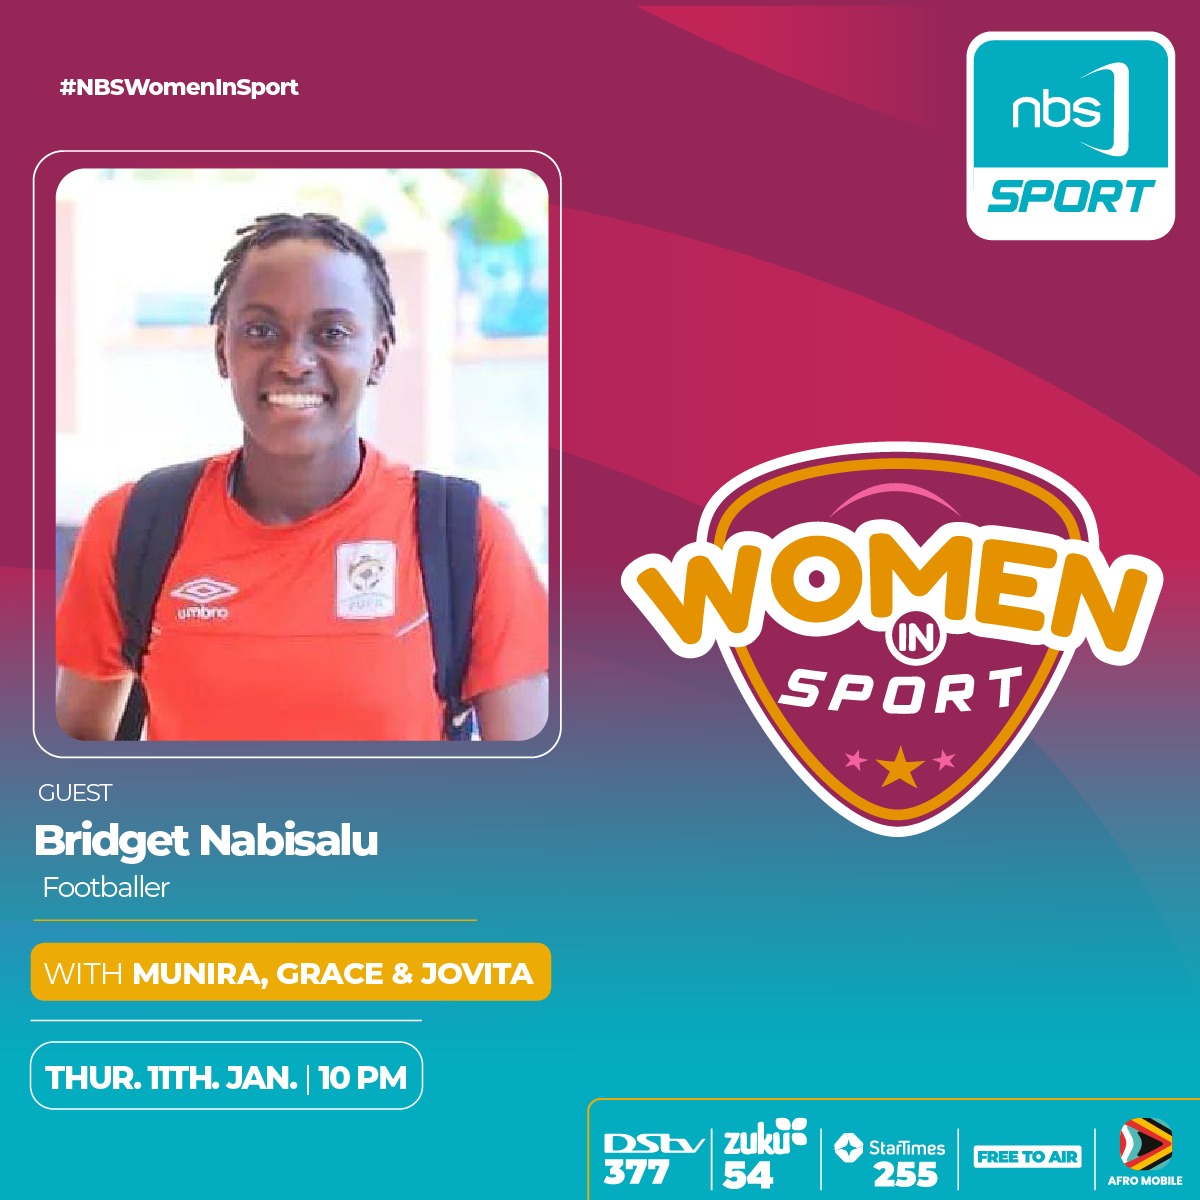 This evening, Bridget Nabisalu, the former assistant captain of the @CrestedCranes, will be featured as our guest on the #NBSWomenInSport show starting at 10 pm.

@munirajbux | @JovitaMusimenta | @gracelmbabazi 

#NBSportUpdates